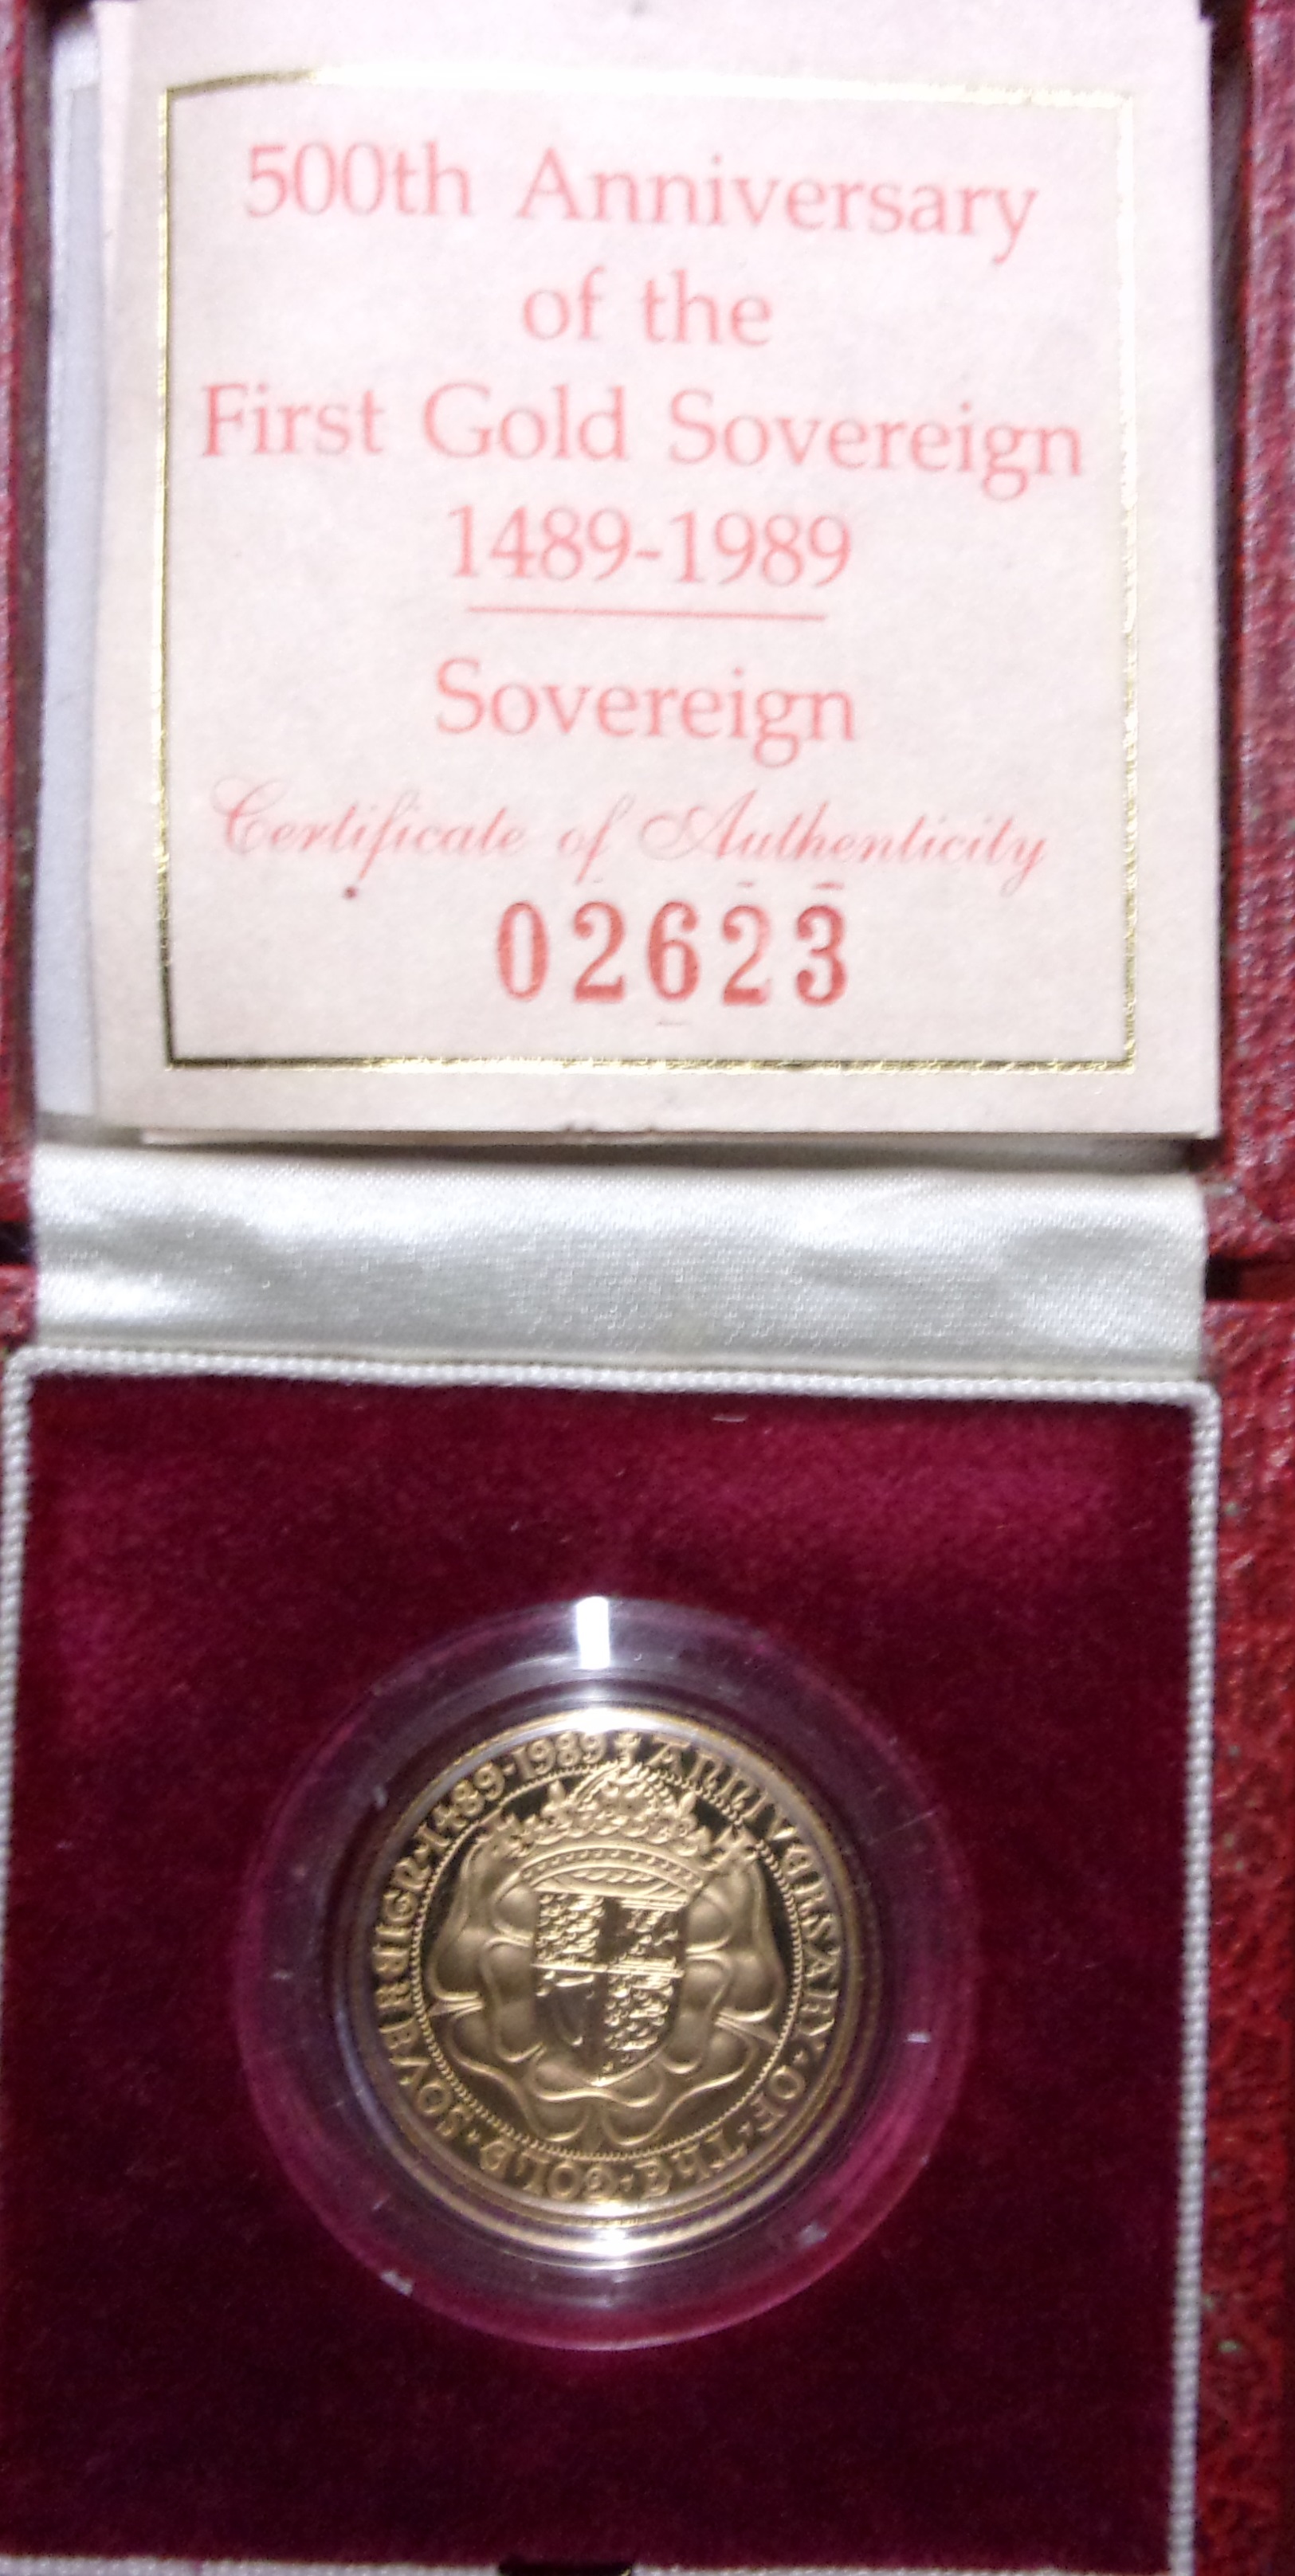 1989 - Gold Elizabeth II Sovereign, Proof. Spink: SC3, Boxed, Cert No. 02623 (A scarce issue